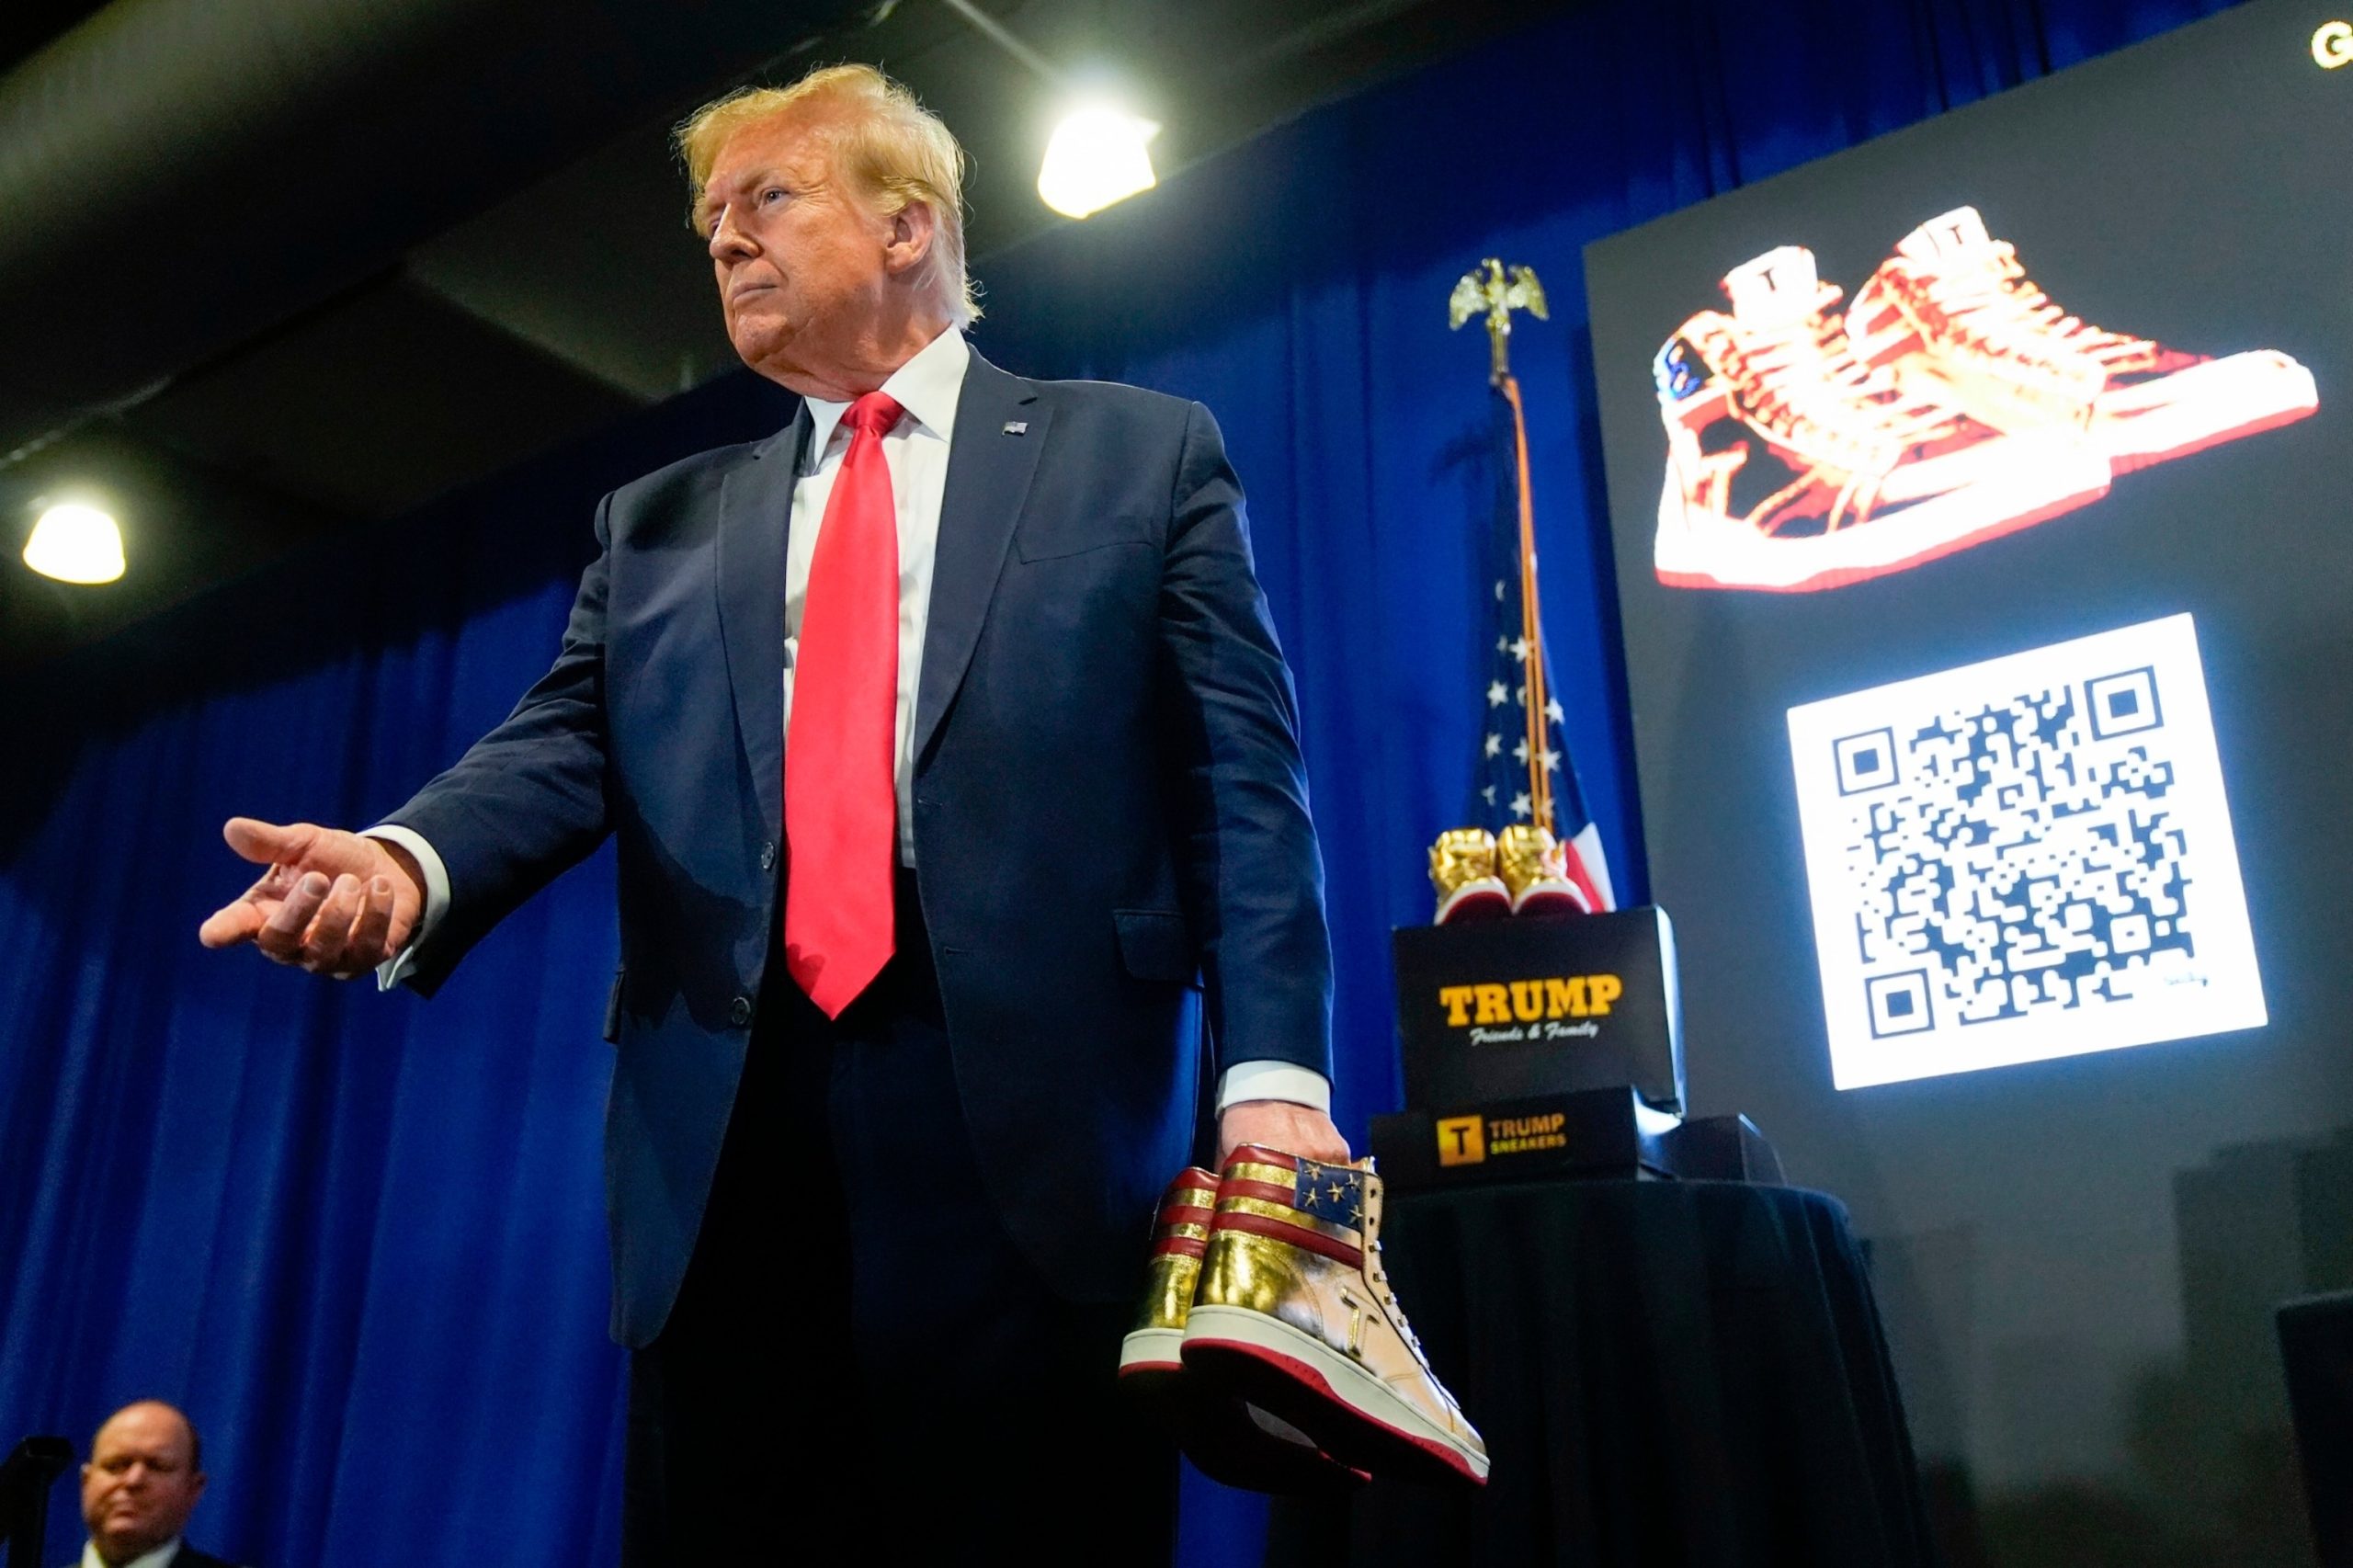 Trump faces backlash from crowd while promoting sneakers in Philadelphia